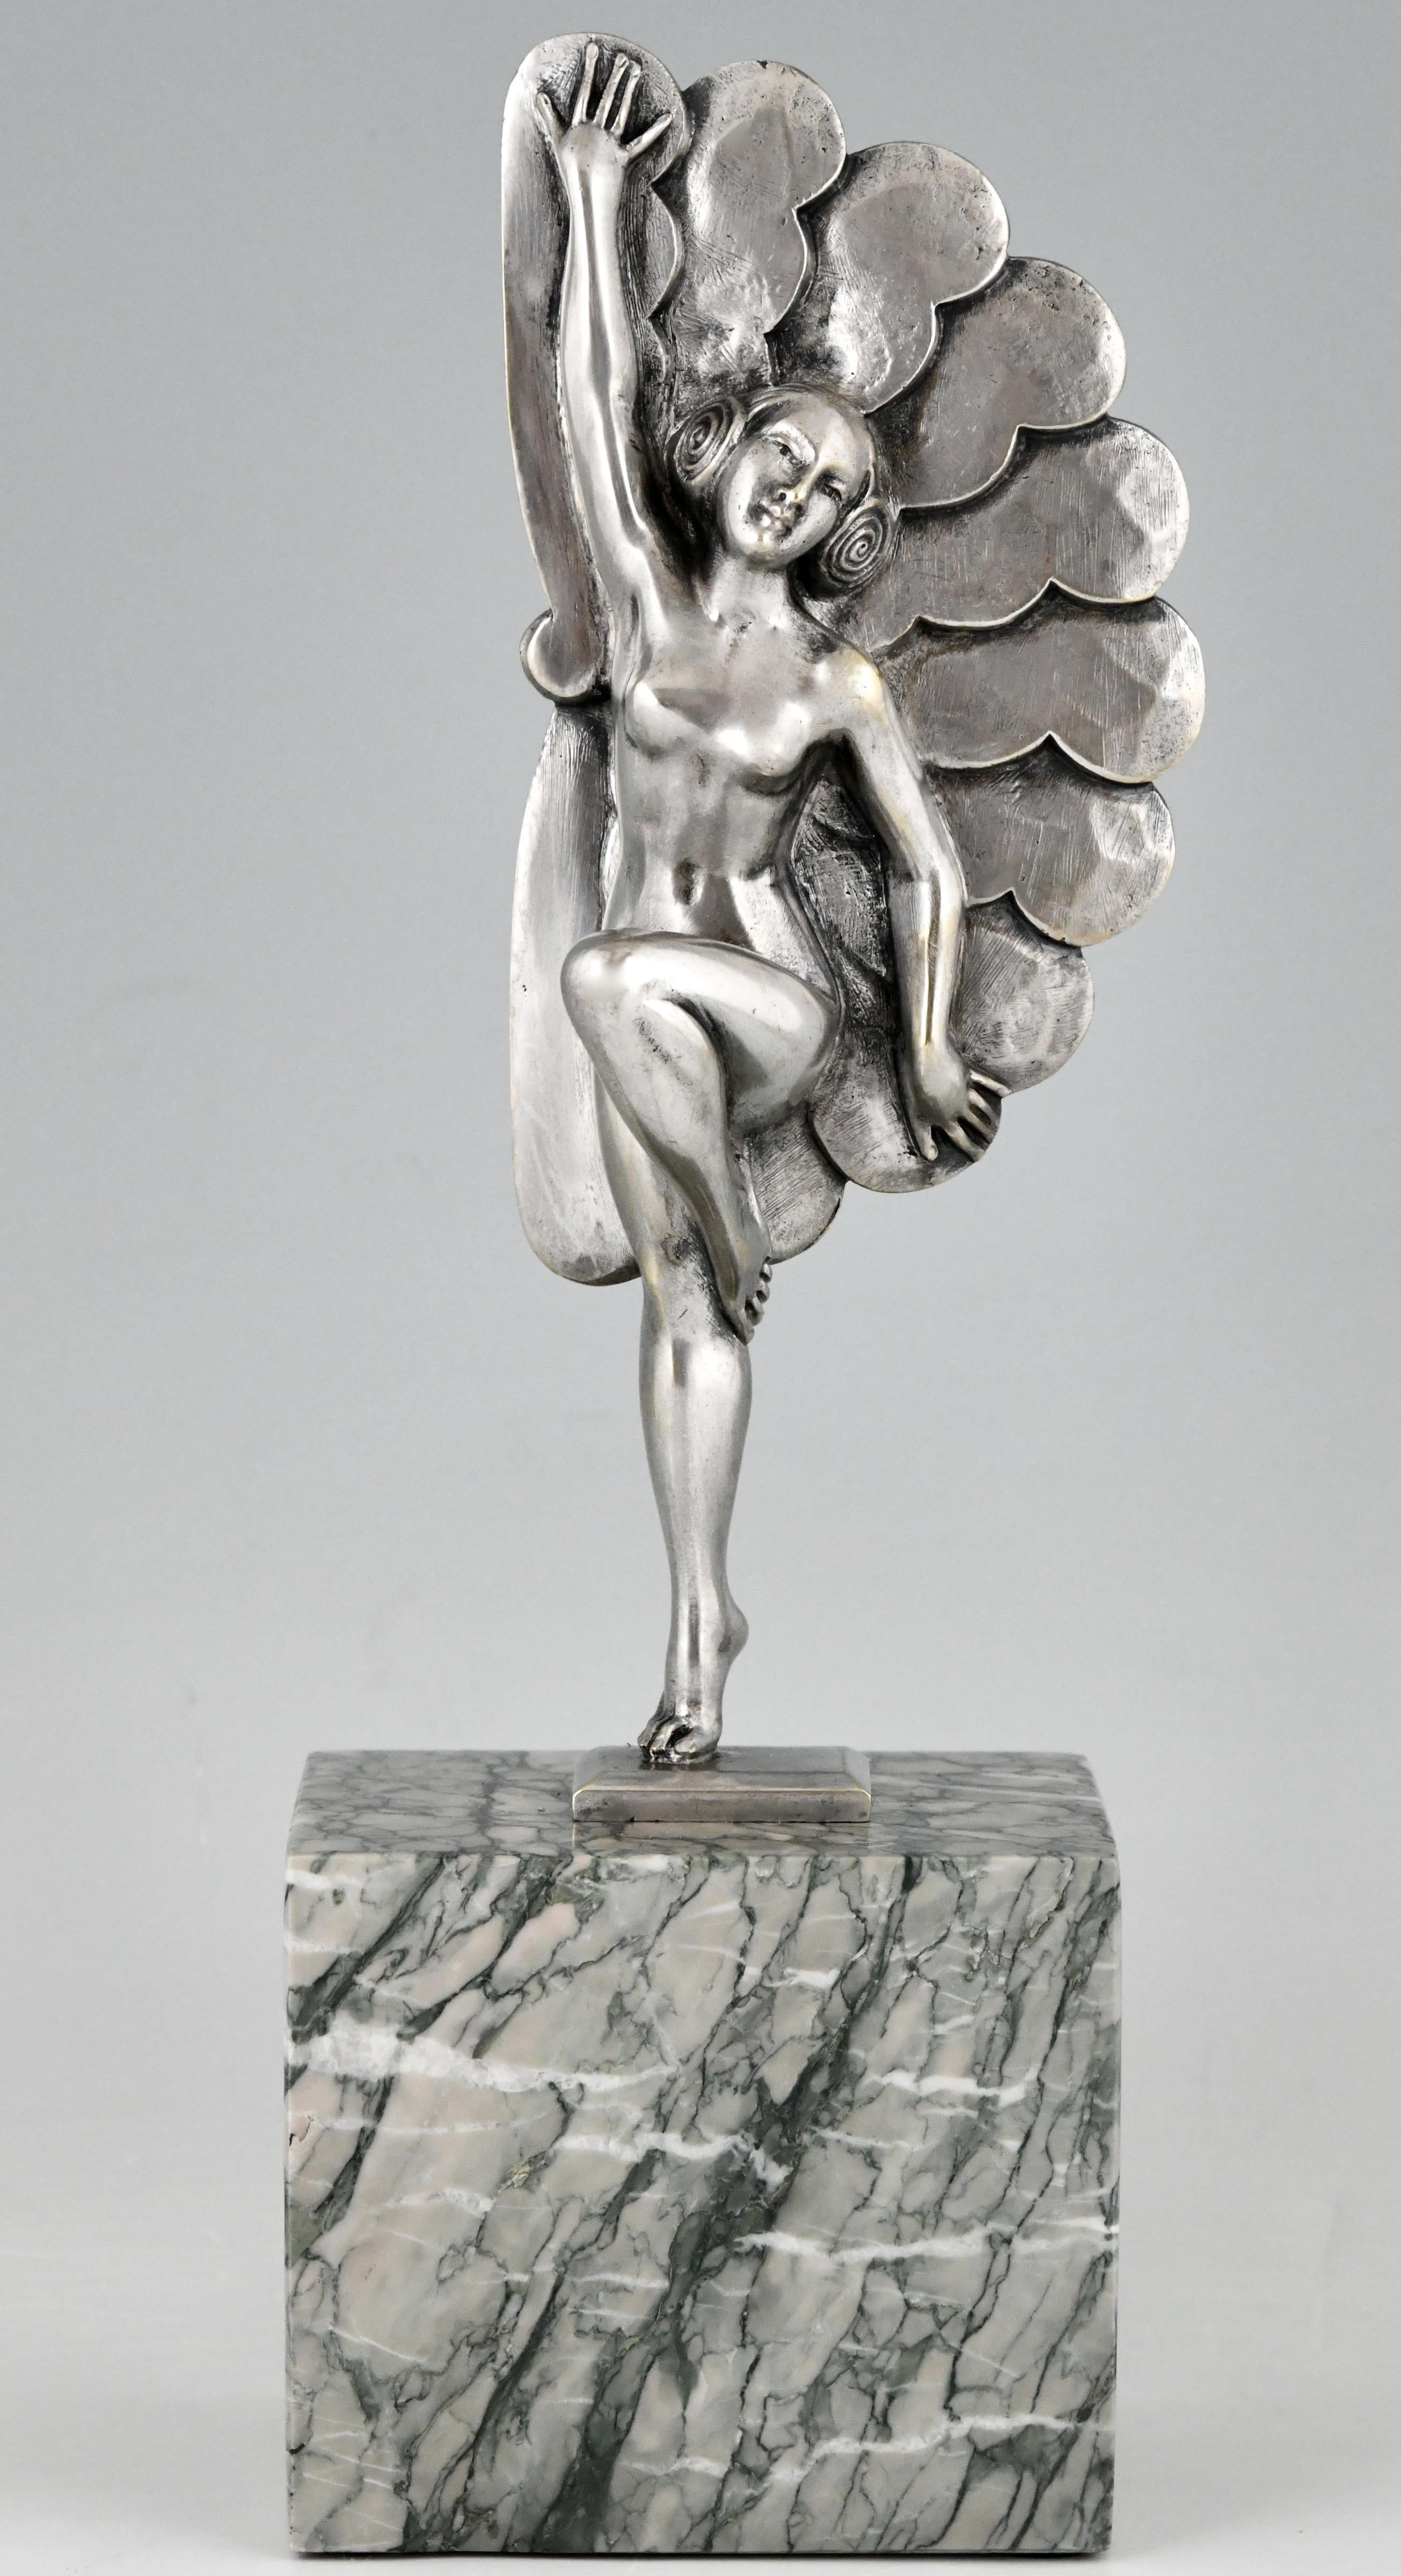 Art Deco sculpture in silvered bronze picturing a dancing lady with feathers. The bronze is signed by H. Molins and stands light green marble base, France 1925. 

“Art Deco and other figures” by Brian Catley, Antique collectors club. “Art Deco